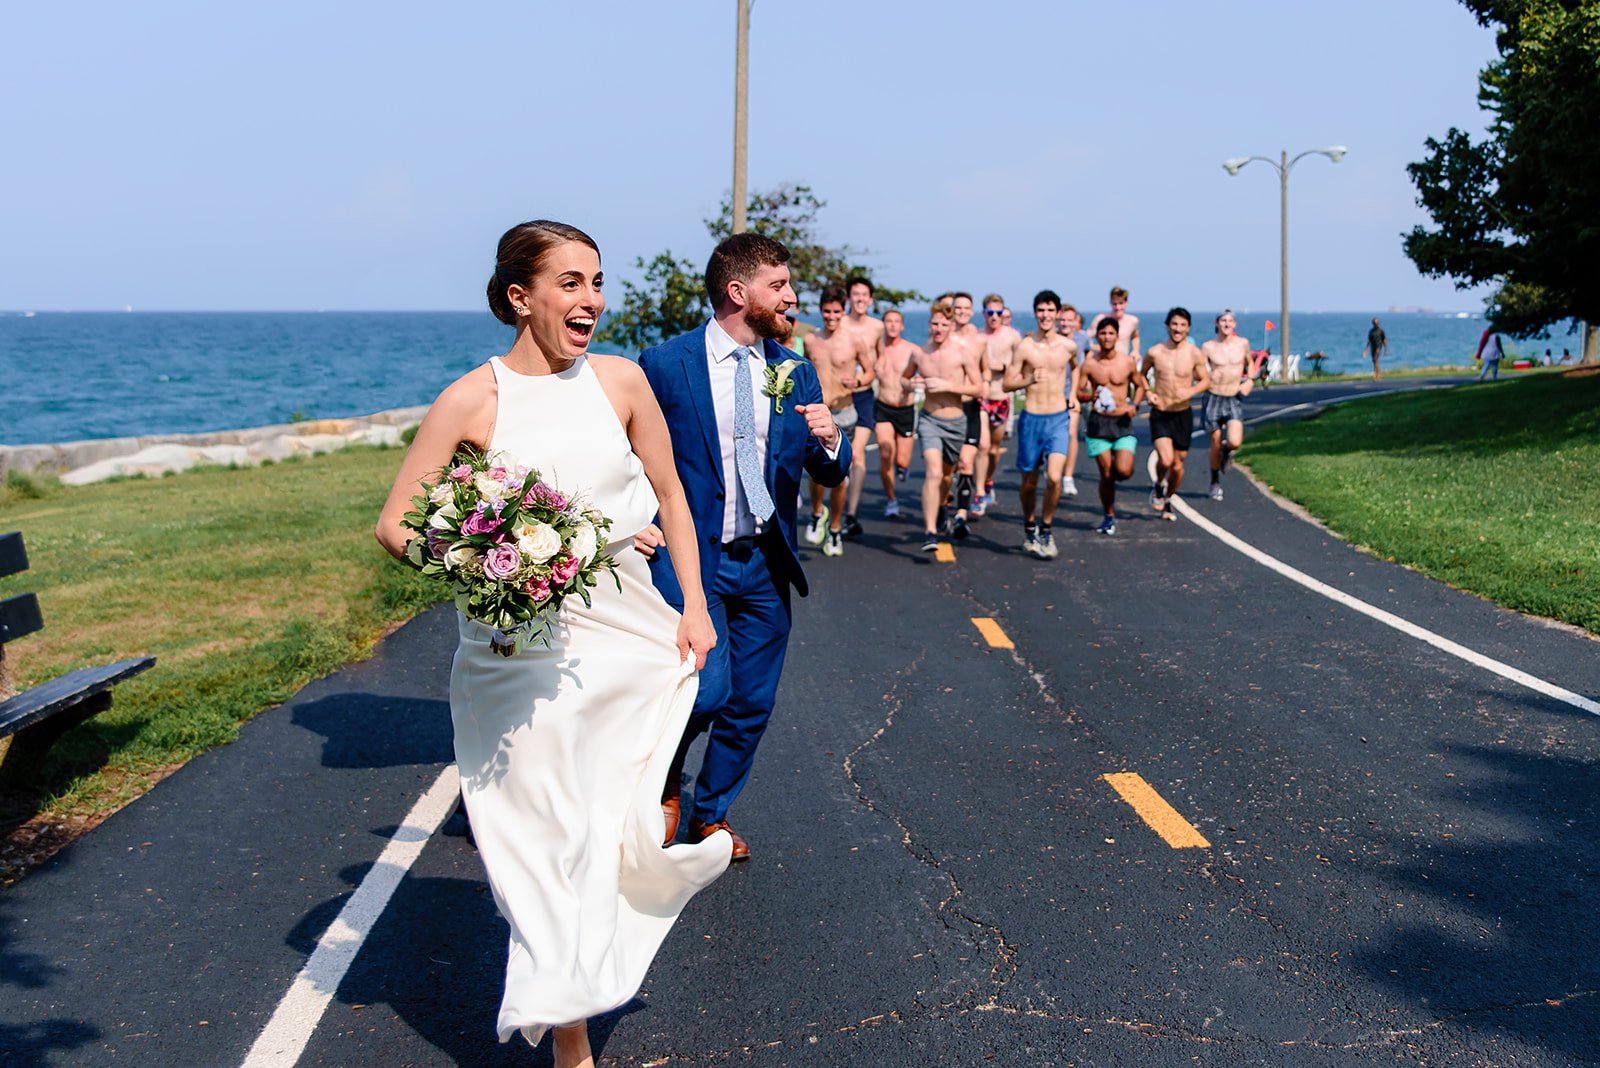  A couple runs along with some athletes running a marathon on their wedding day 